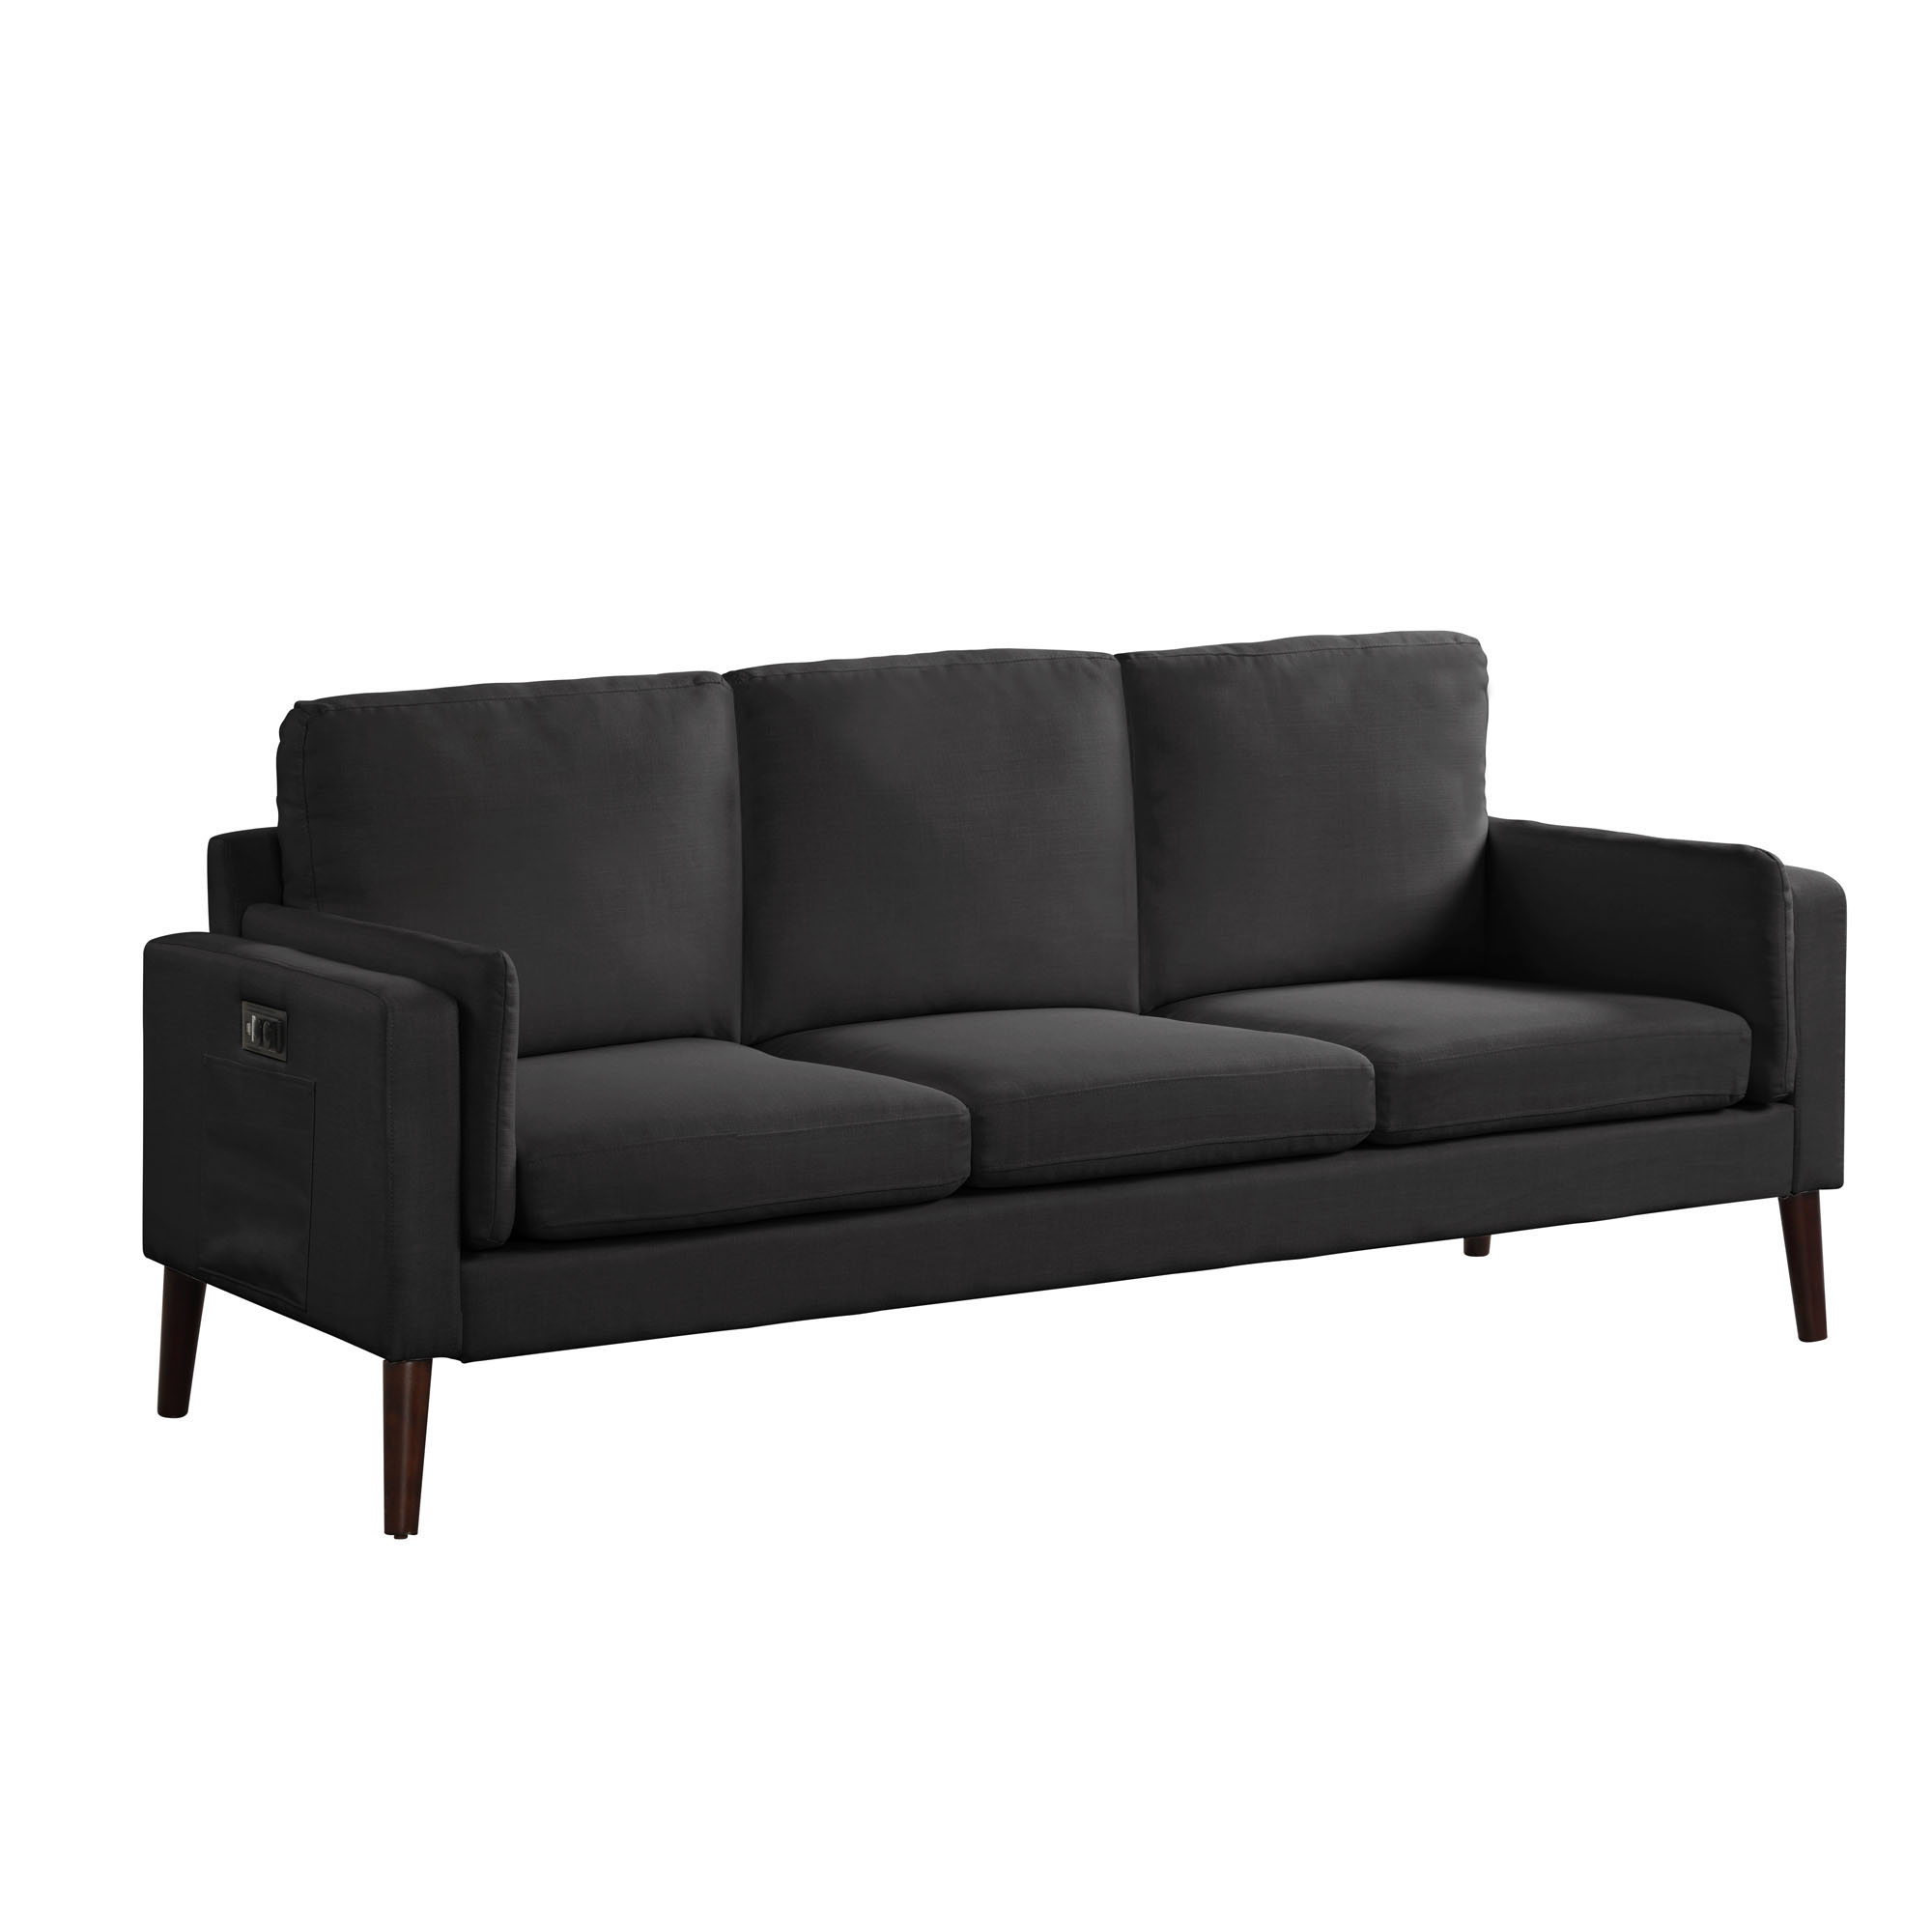 Elm & Oak Nathaniel Modern Sofa with Side Pocket and USB Power, Black Fabric Upholstery - image 4 of 10